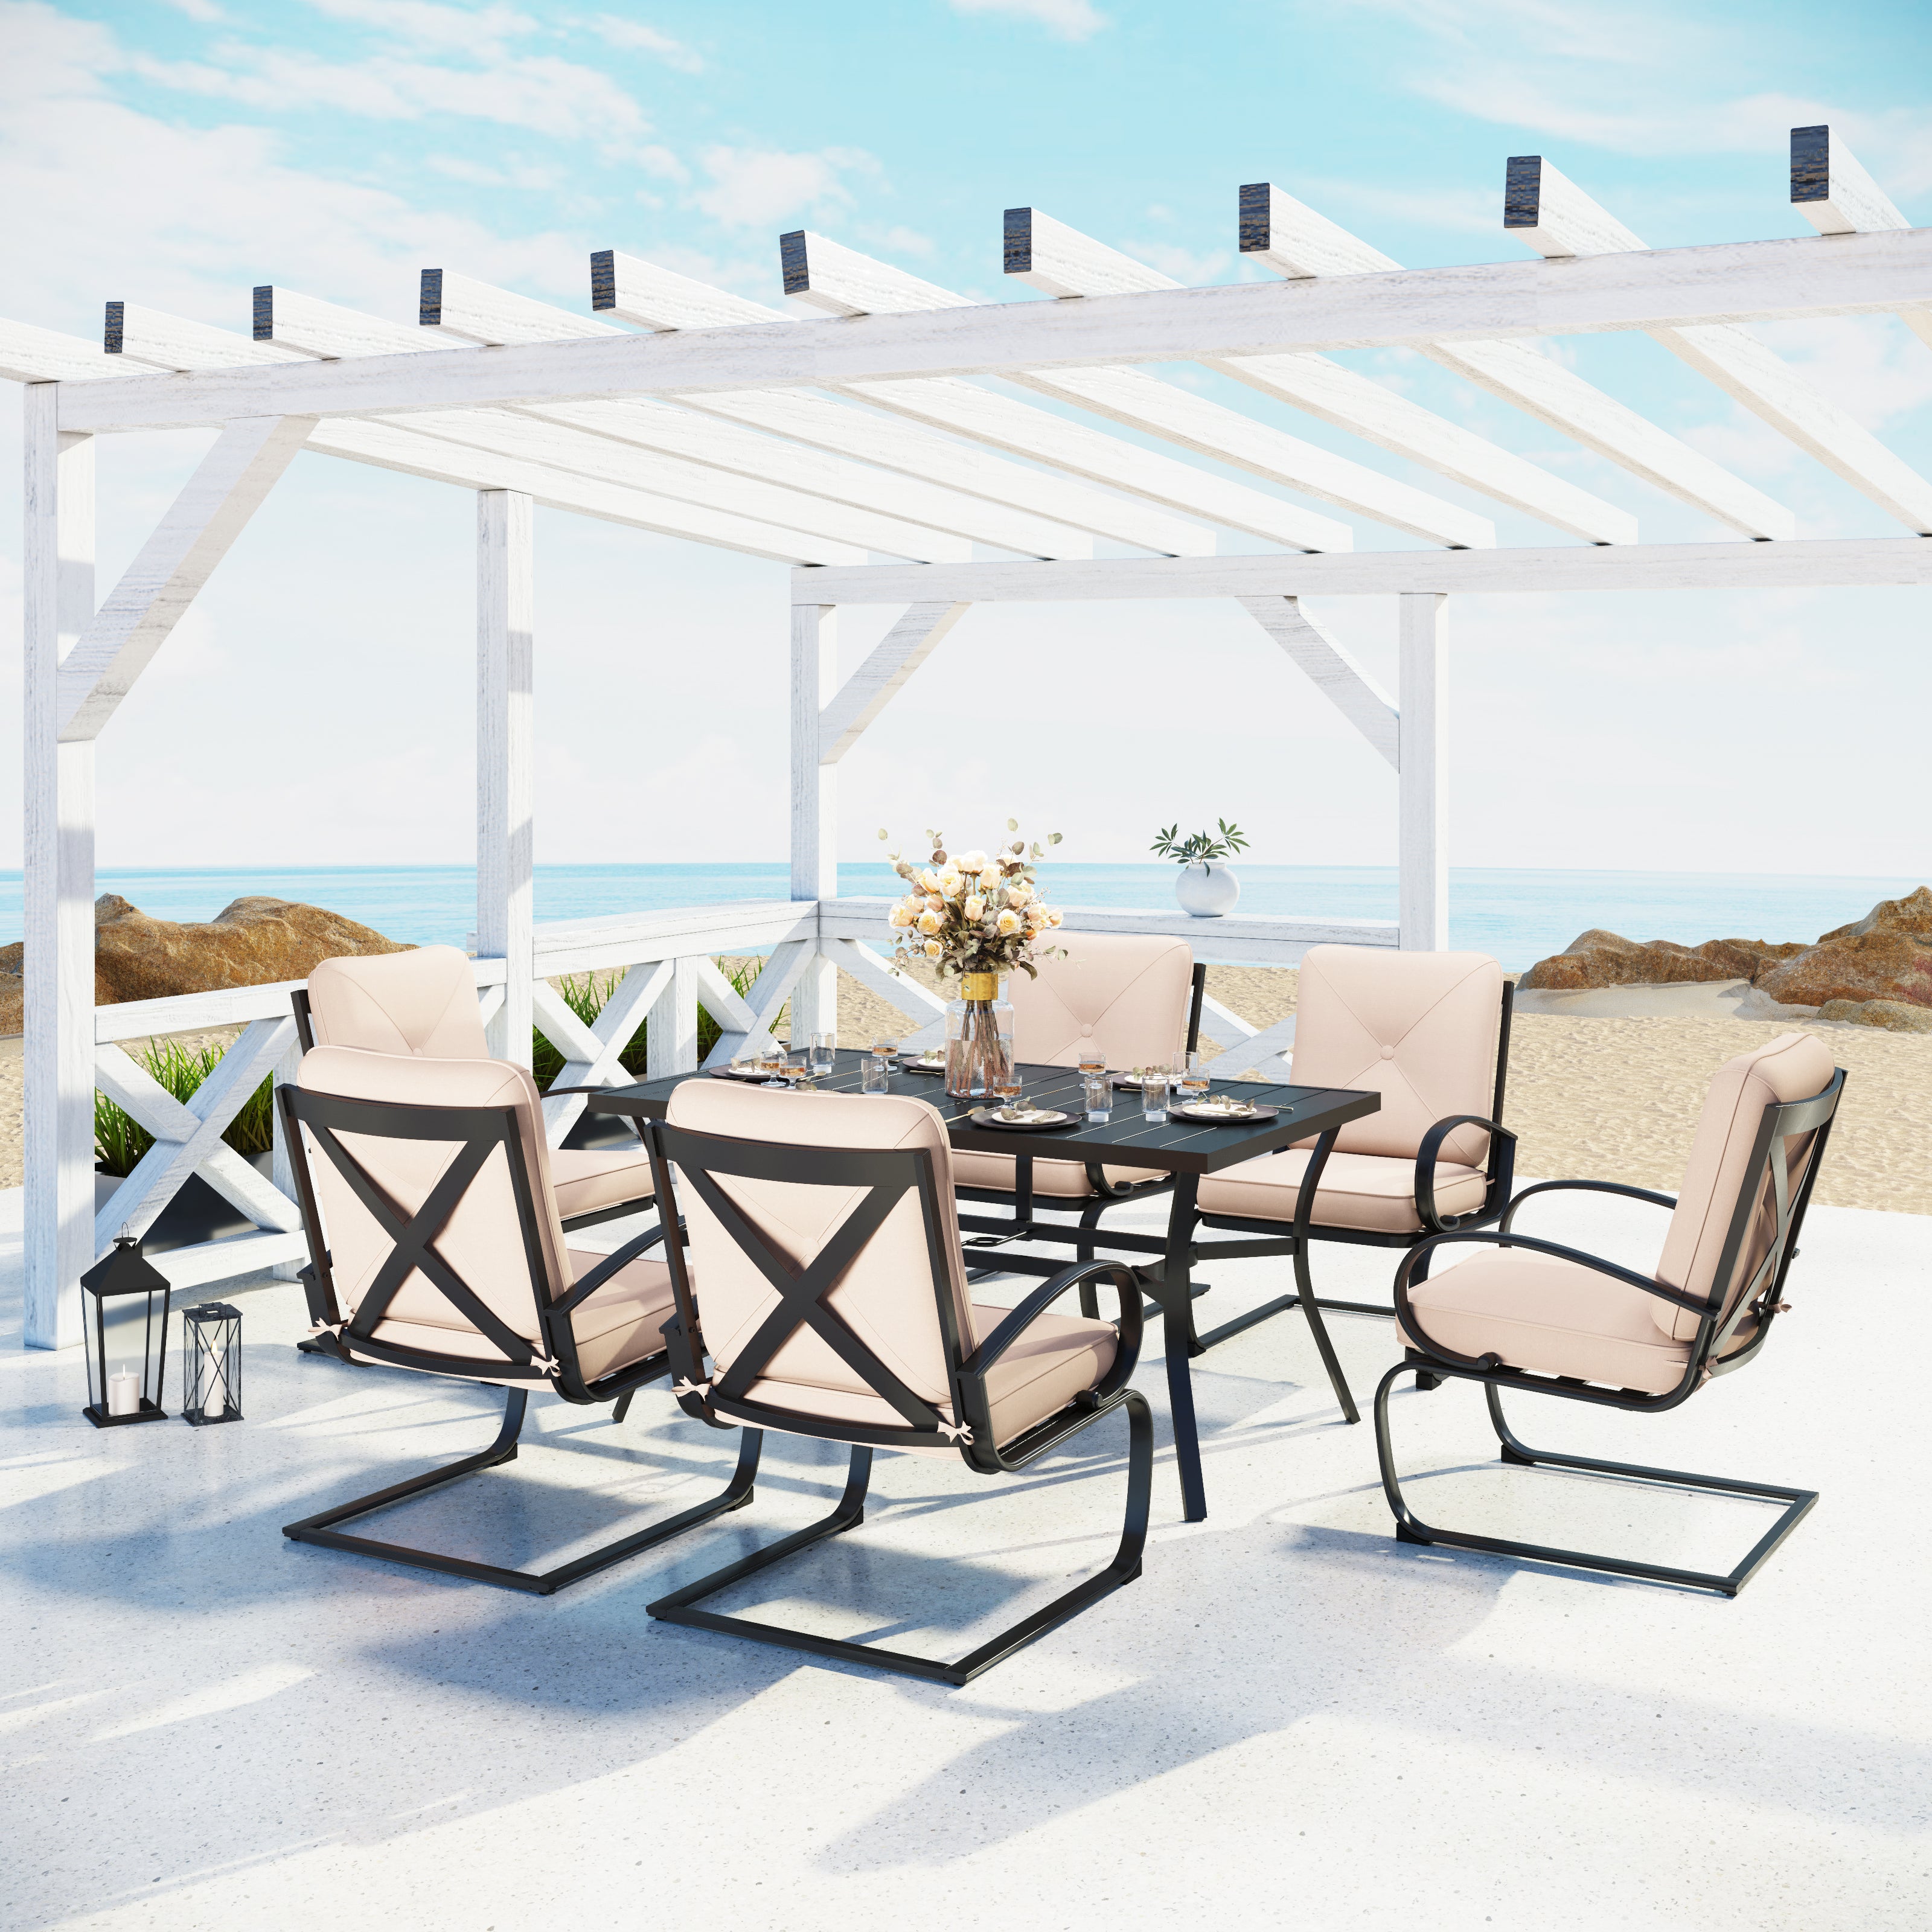 Sophia & William 7-Piece C-Spring Chairs & Steel Panel Table Patio Dining Set